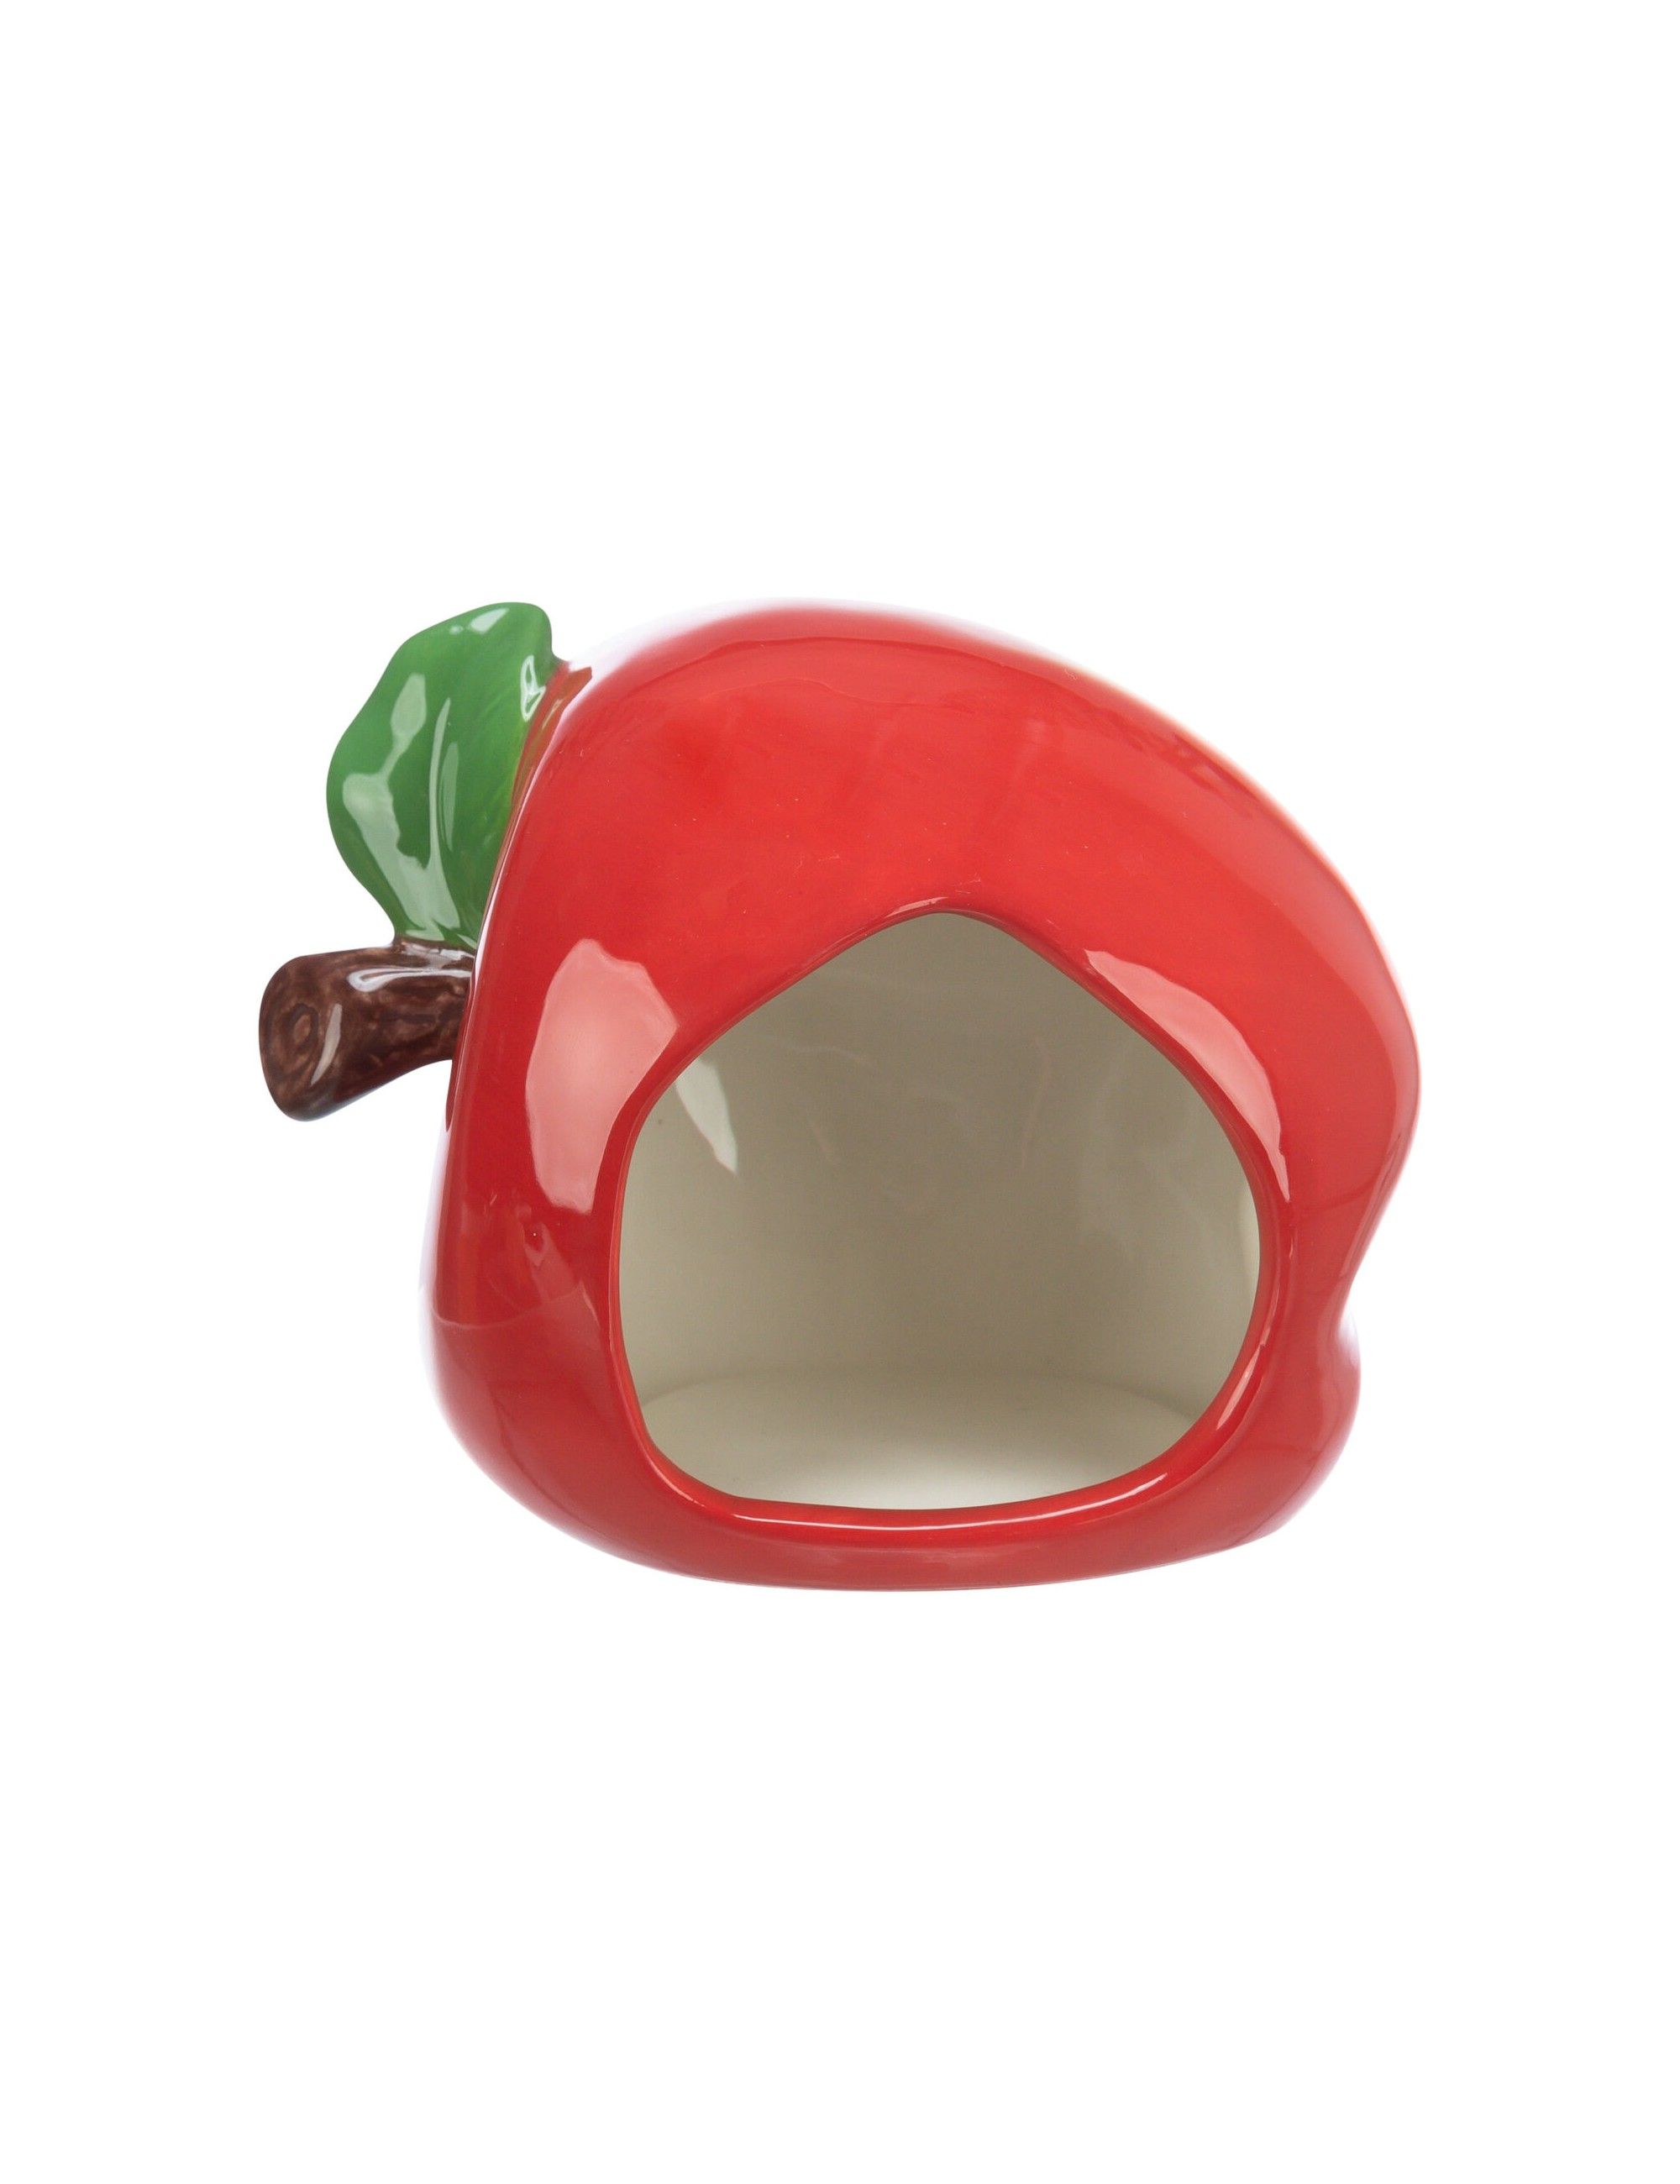 TRIXIE - “Apple” ceramic house for Hamsters and Mice